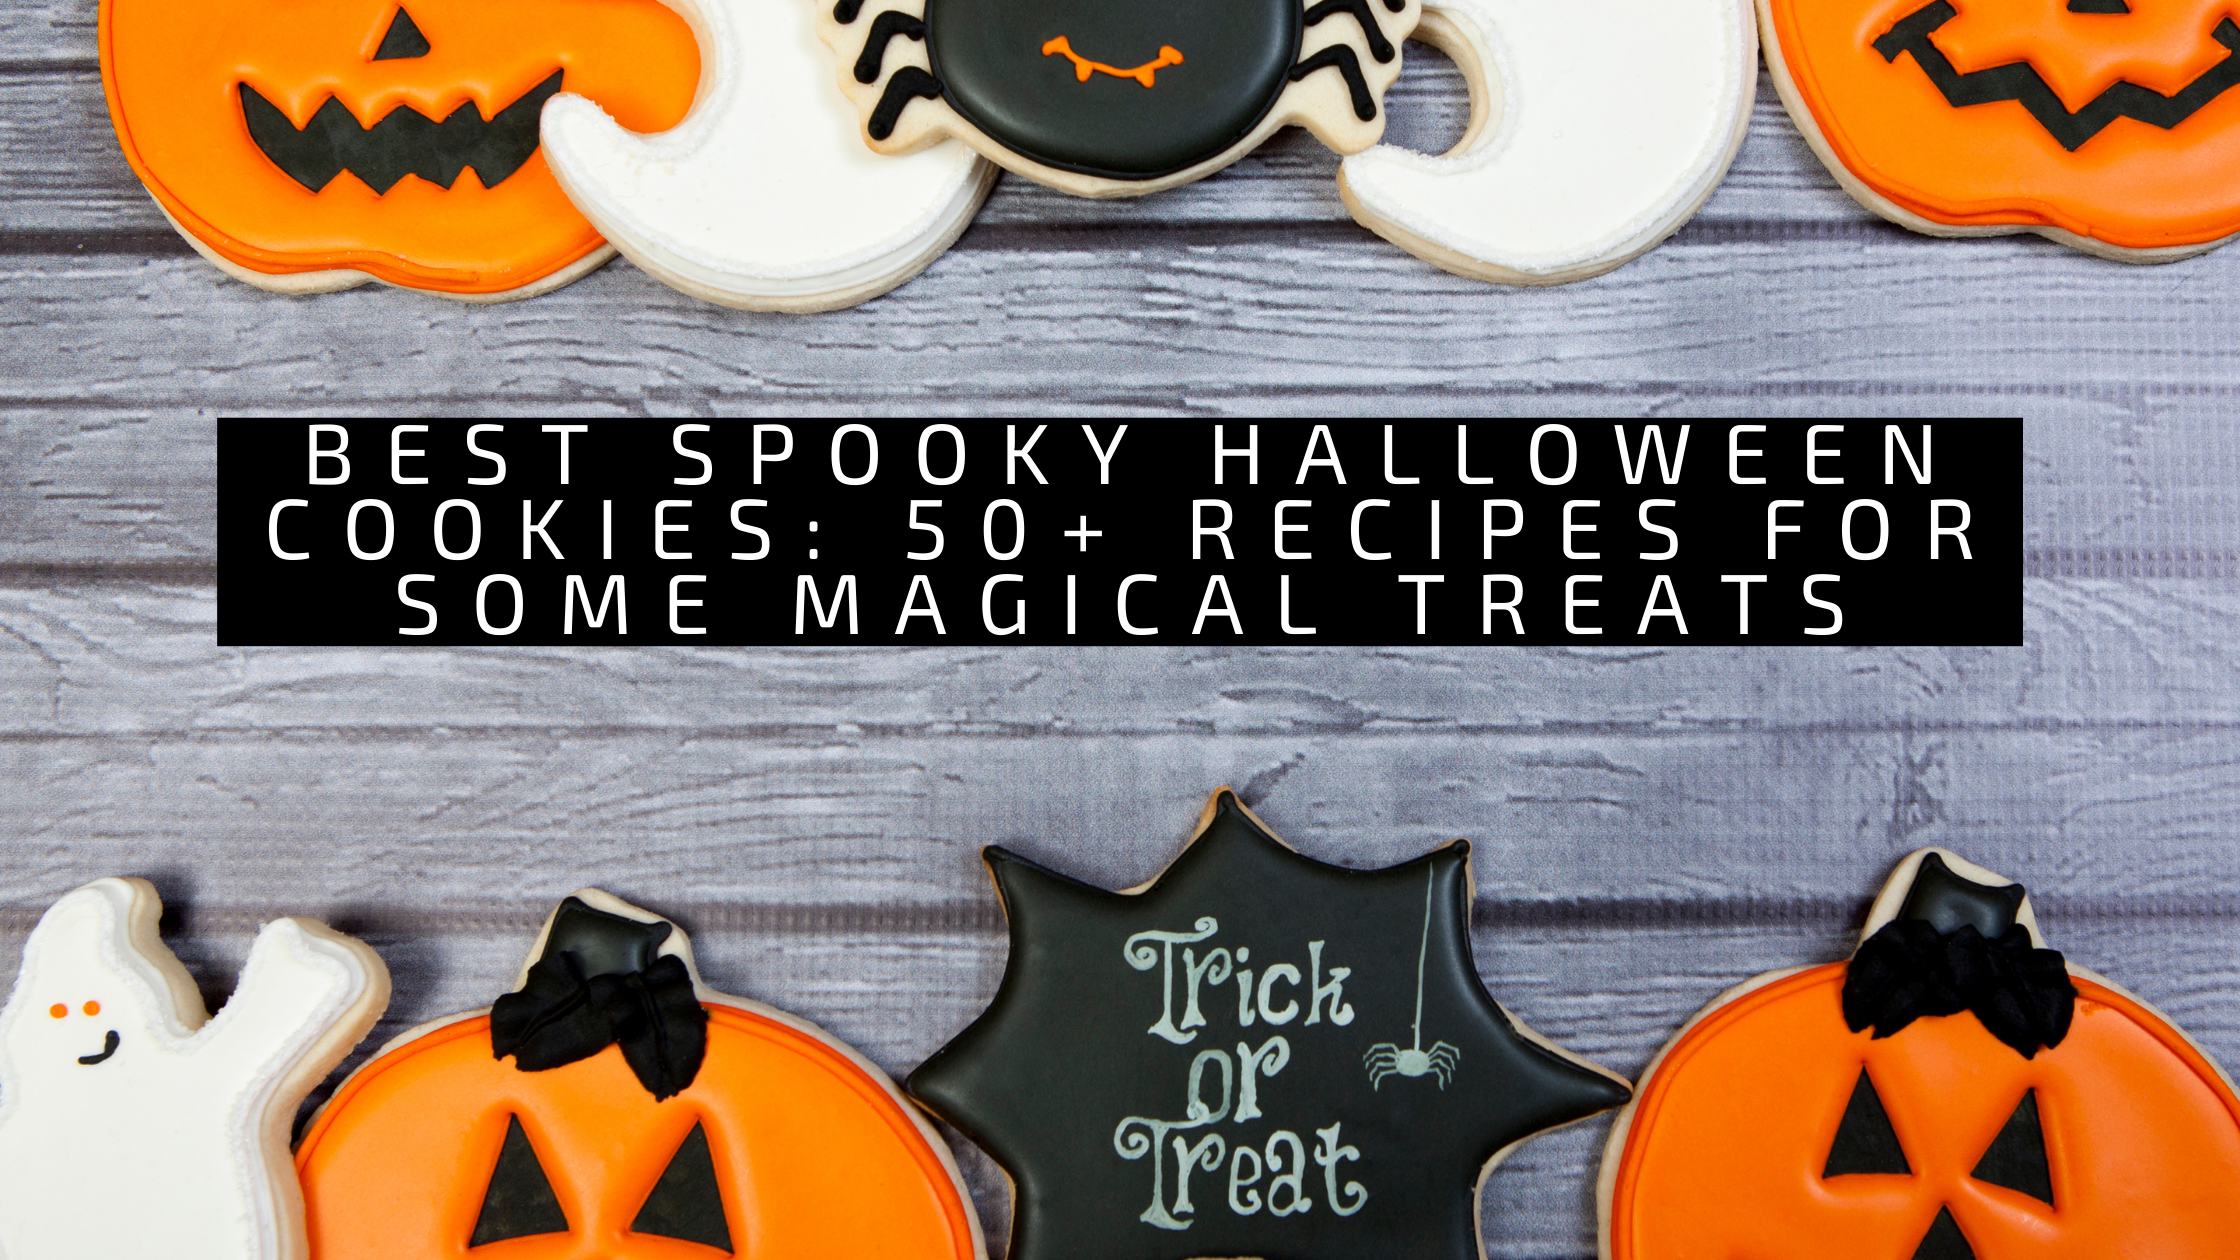 Best Spooky Halloween Cookies: 50+ Recipes for Some Magical Treats 13